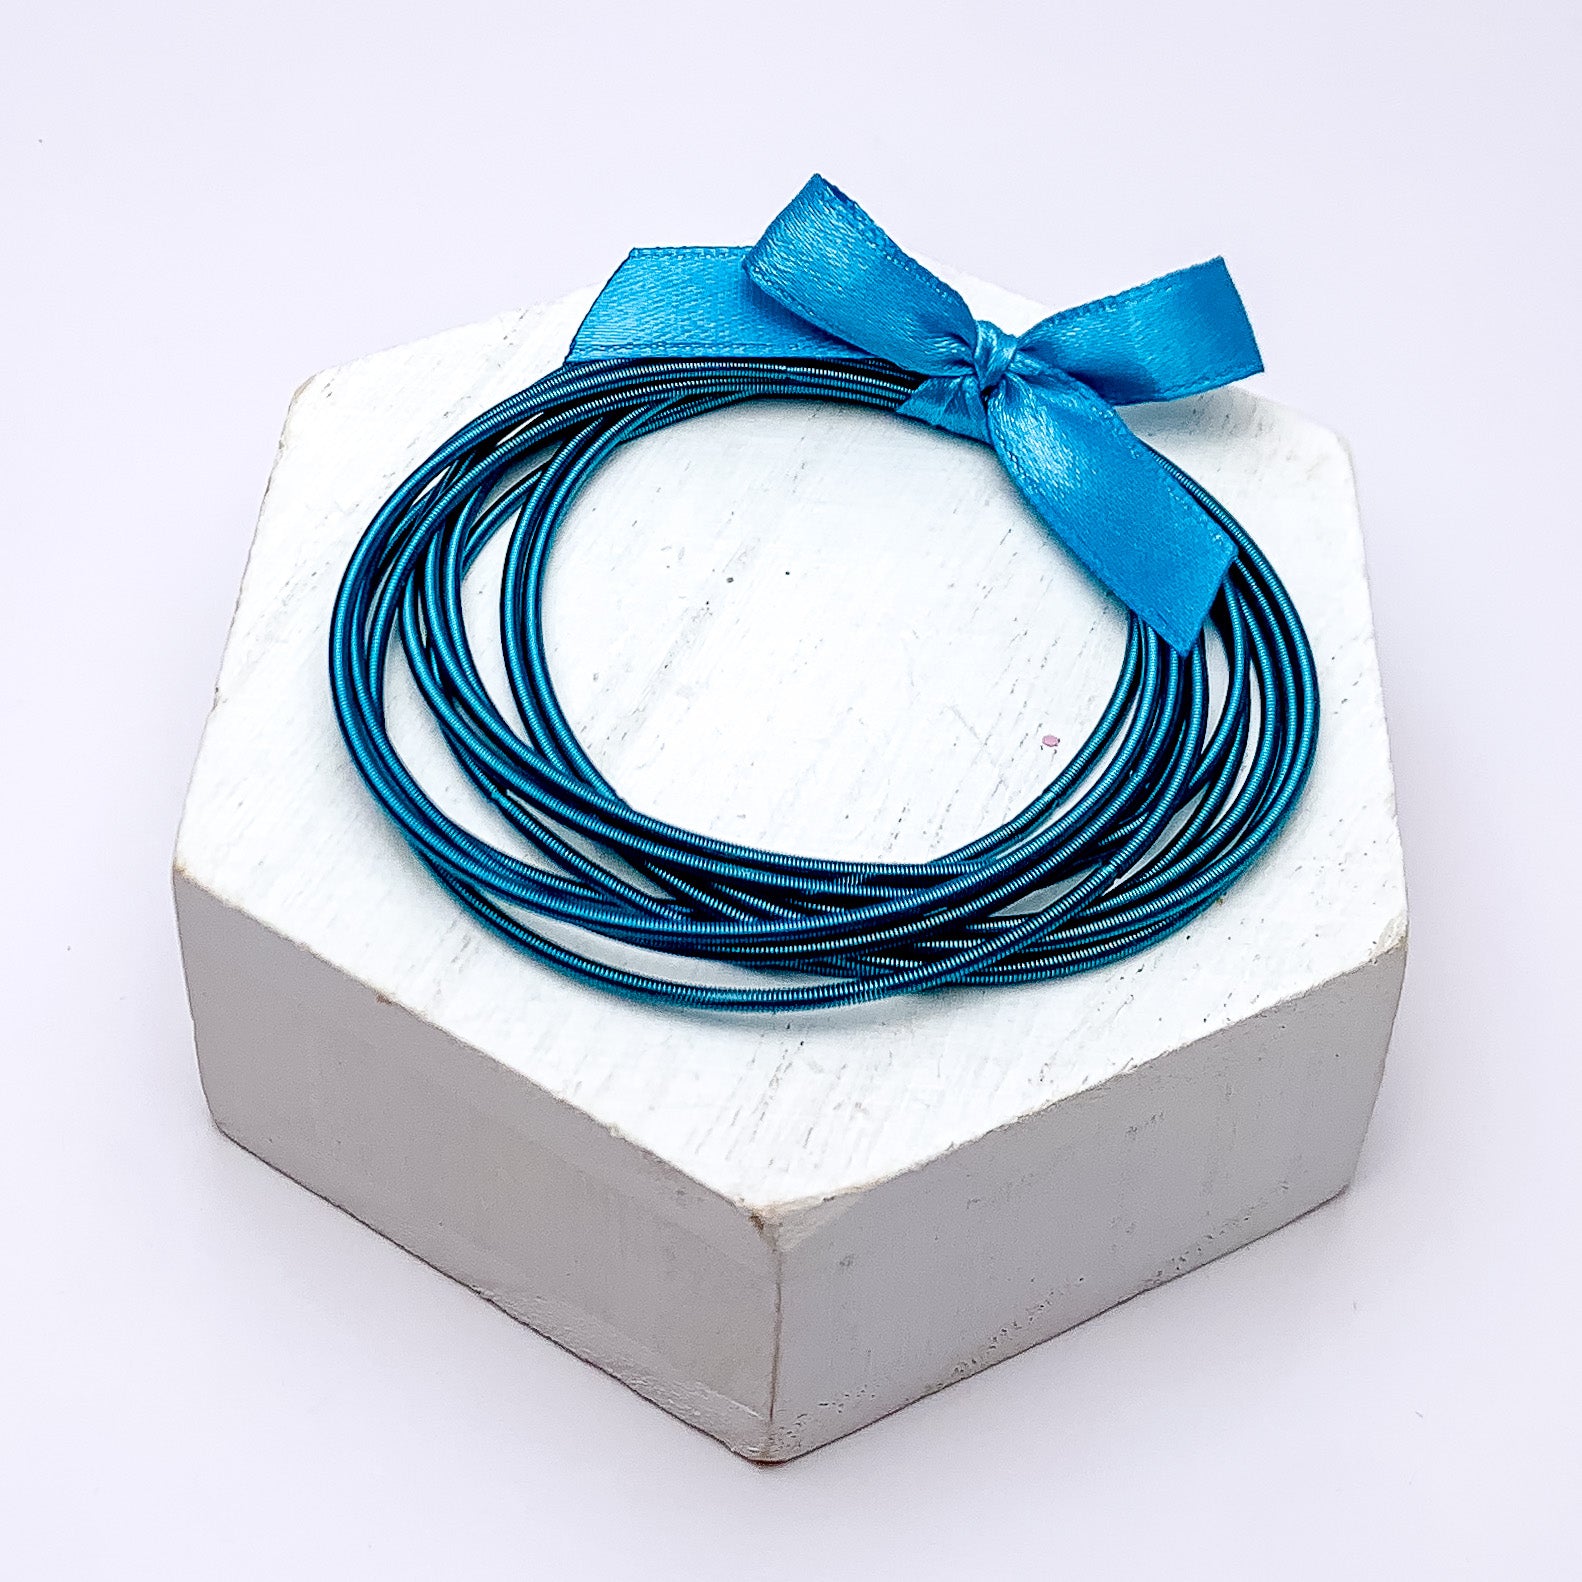 Guitar String Bracelets With Bow in Aqua Blue - Giddy Up Glamour Boutique